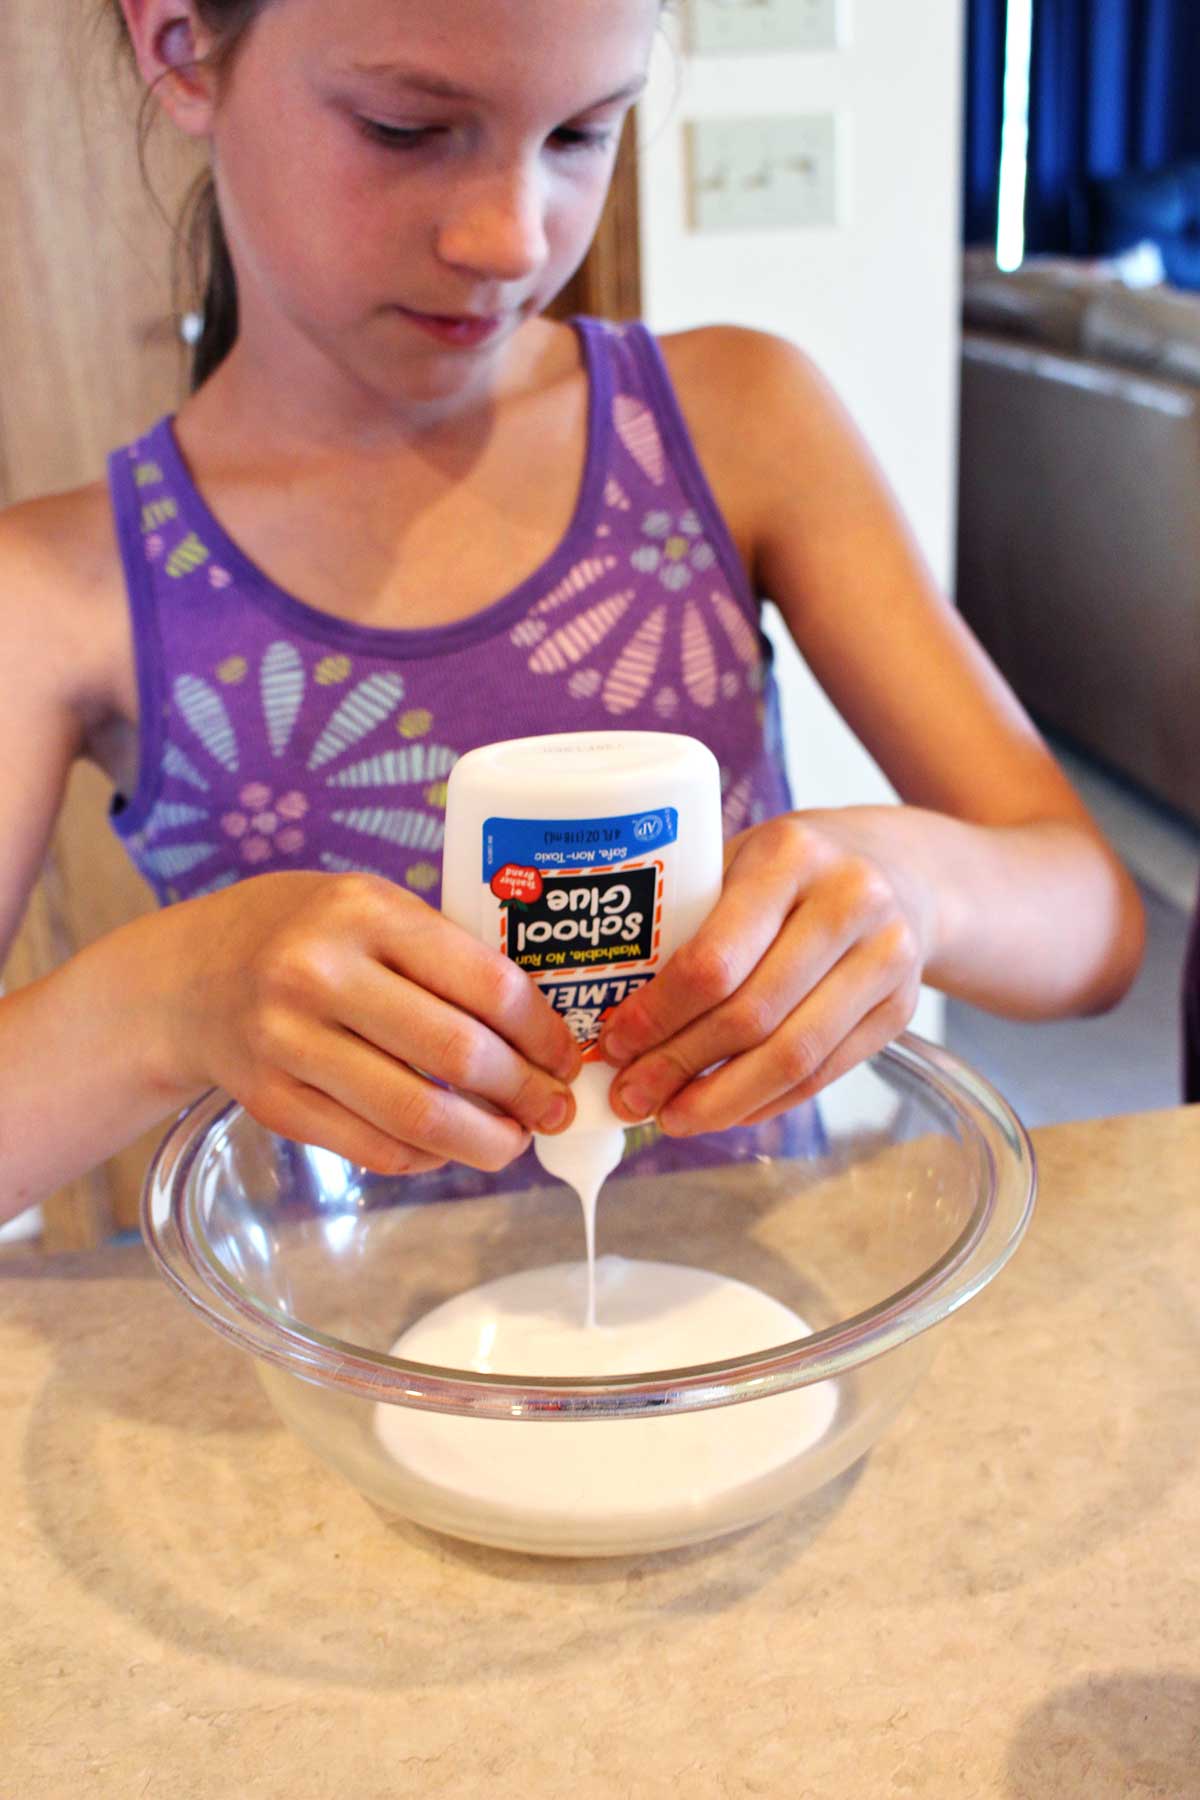 Girl in purple tank top adds Elmer's Glue to a glass bowl.